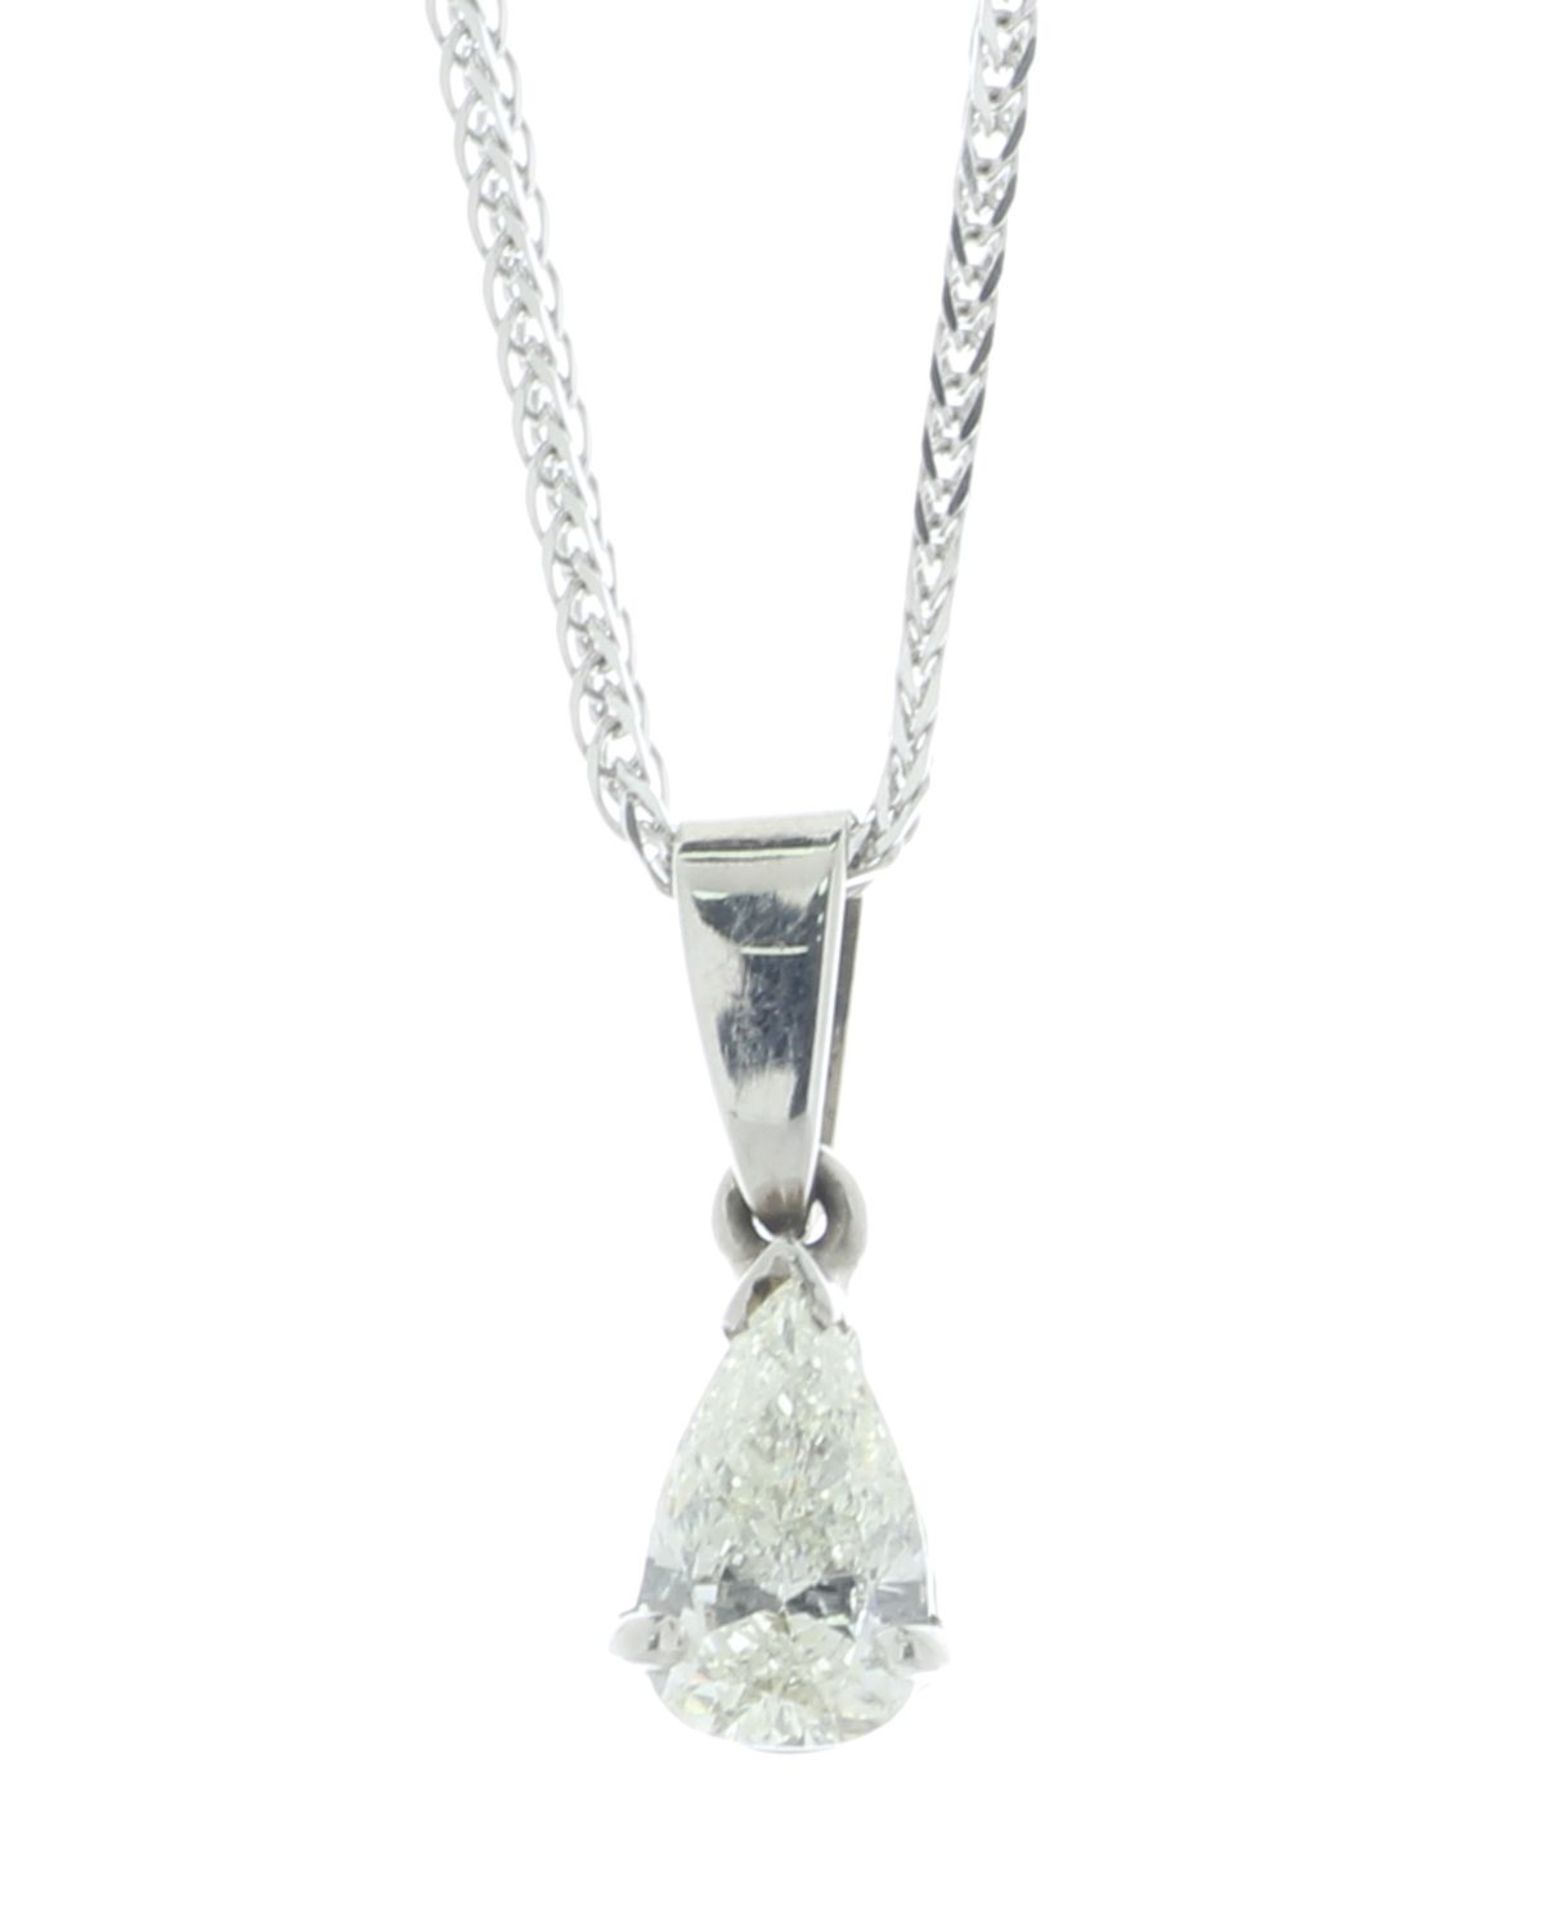 9ct White Gold Pear Shaped Diamond Pendant and 18" Chain 0.90 Carats - Valued By AGI £6,210.00 - One